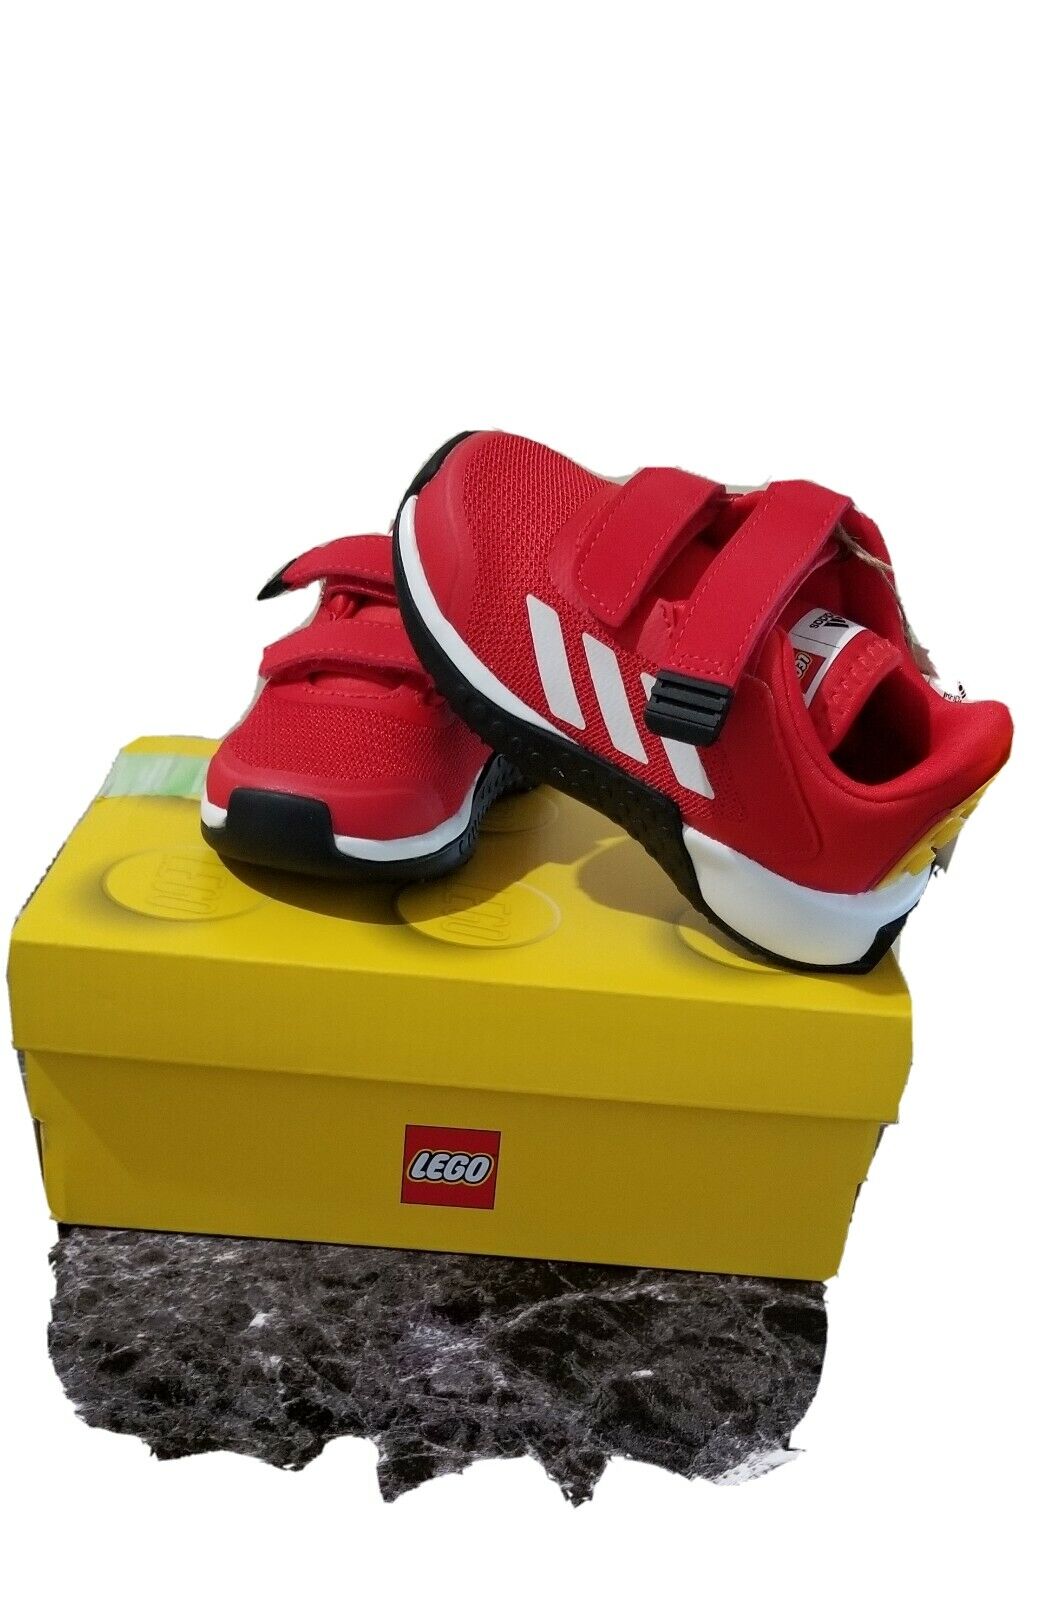 Adidas LEGO Explorer CF I Red Color Kids Running Shoes -FX2877 limited Edition 6